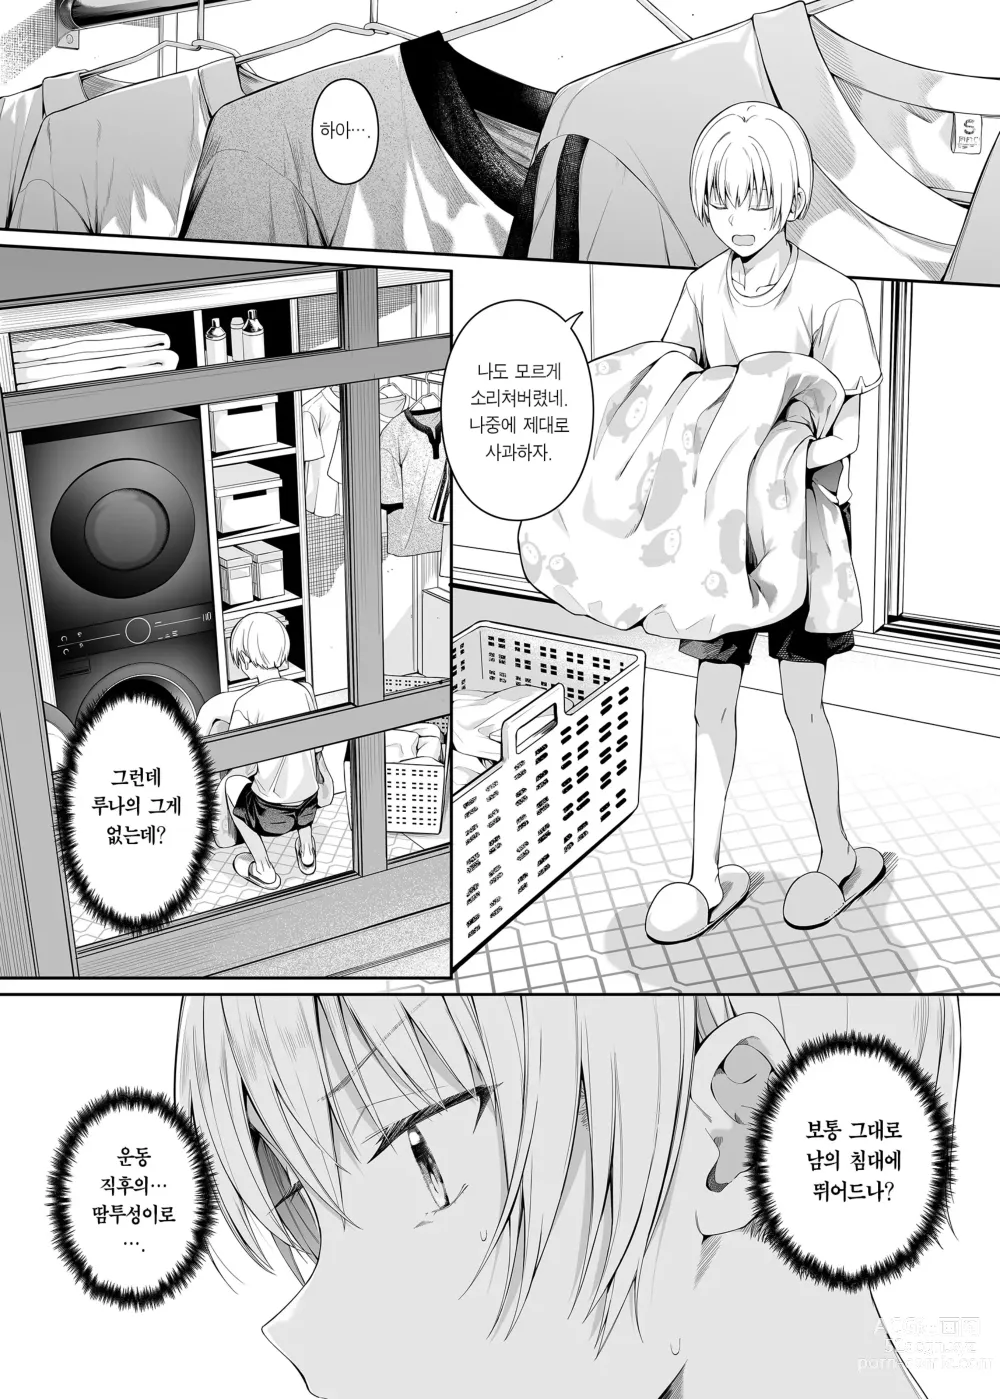 Page 7 of doujinshi 강박성 욕망